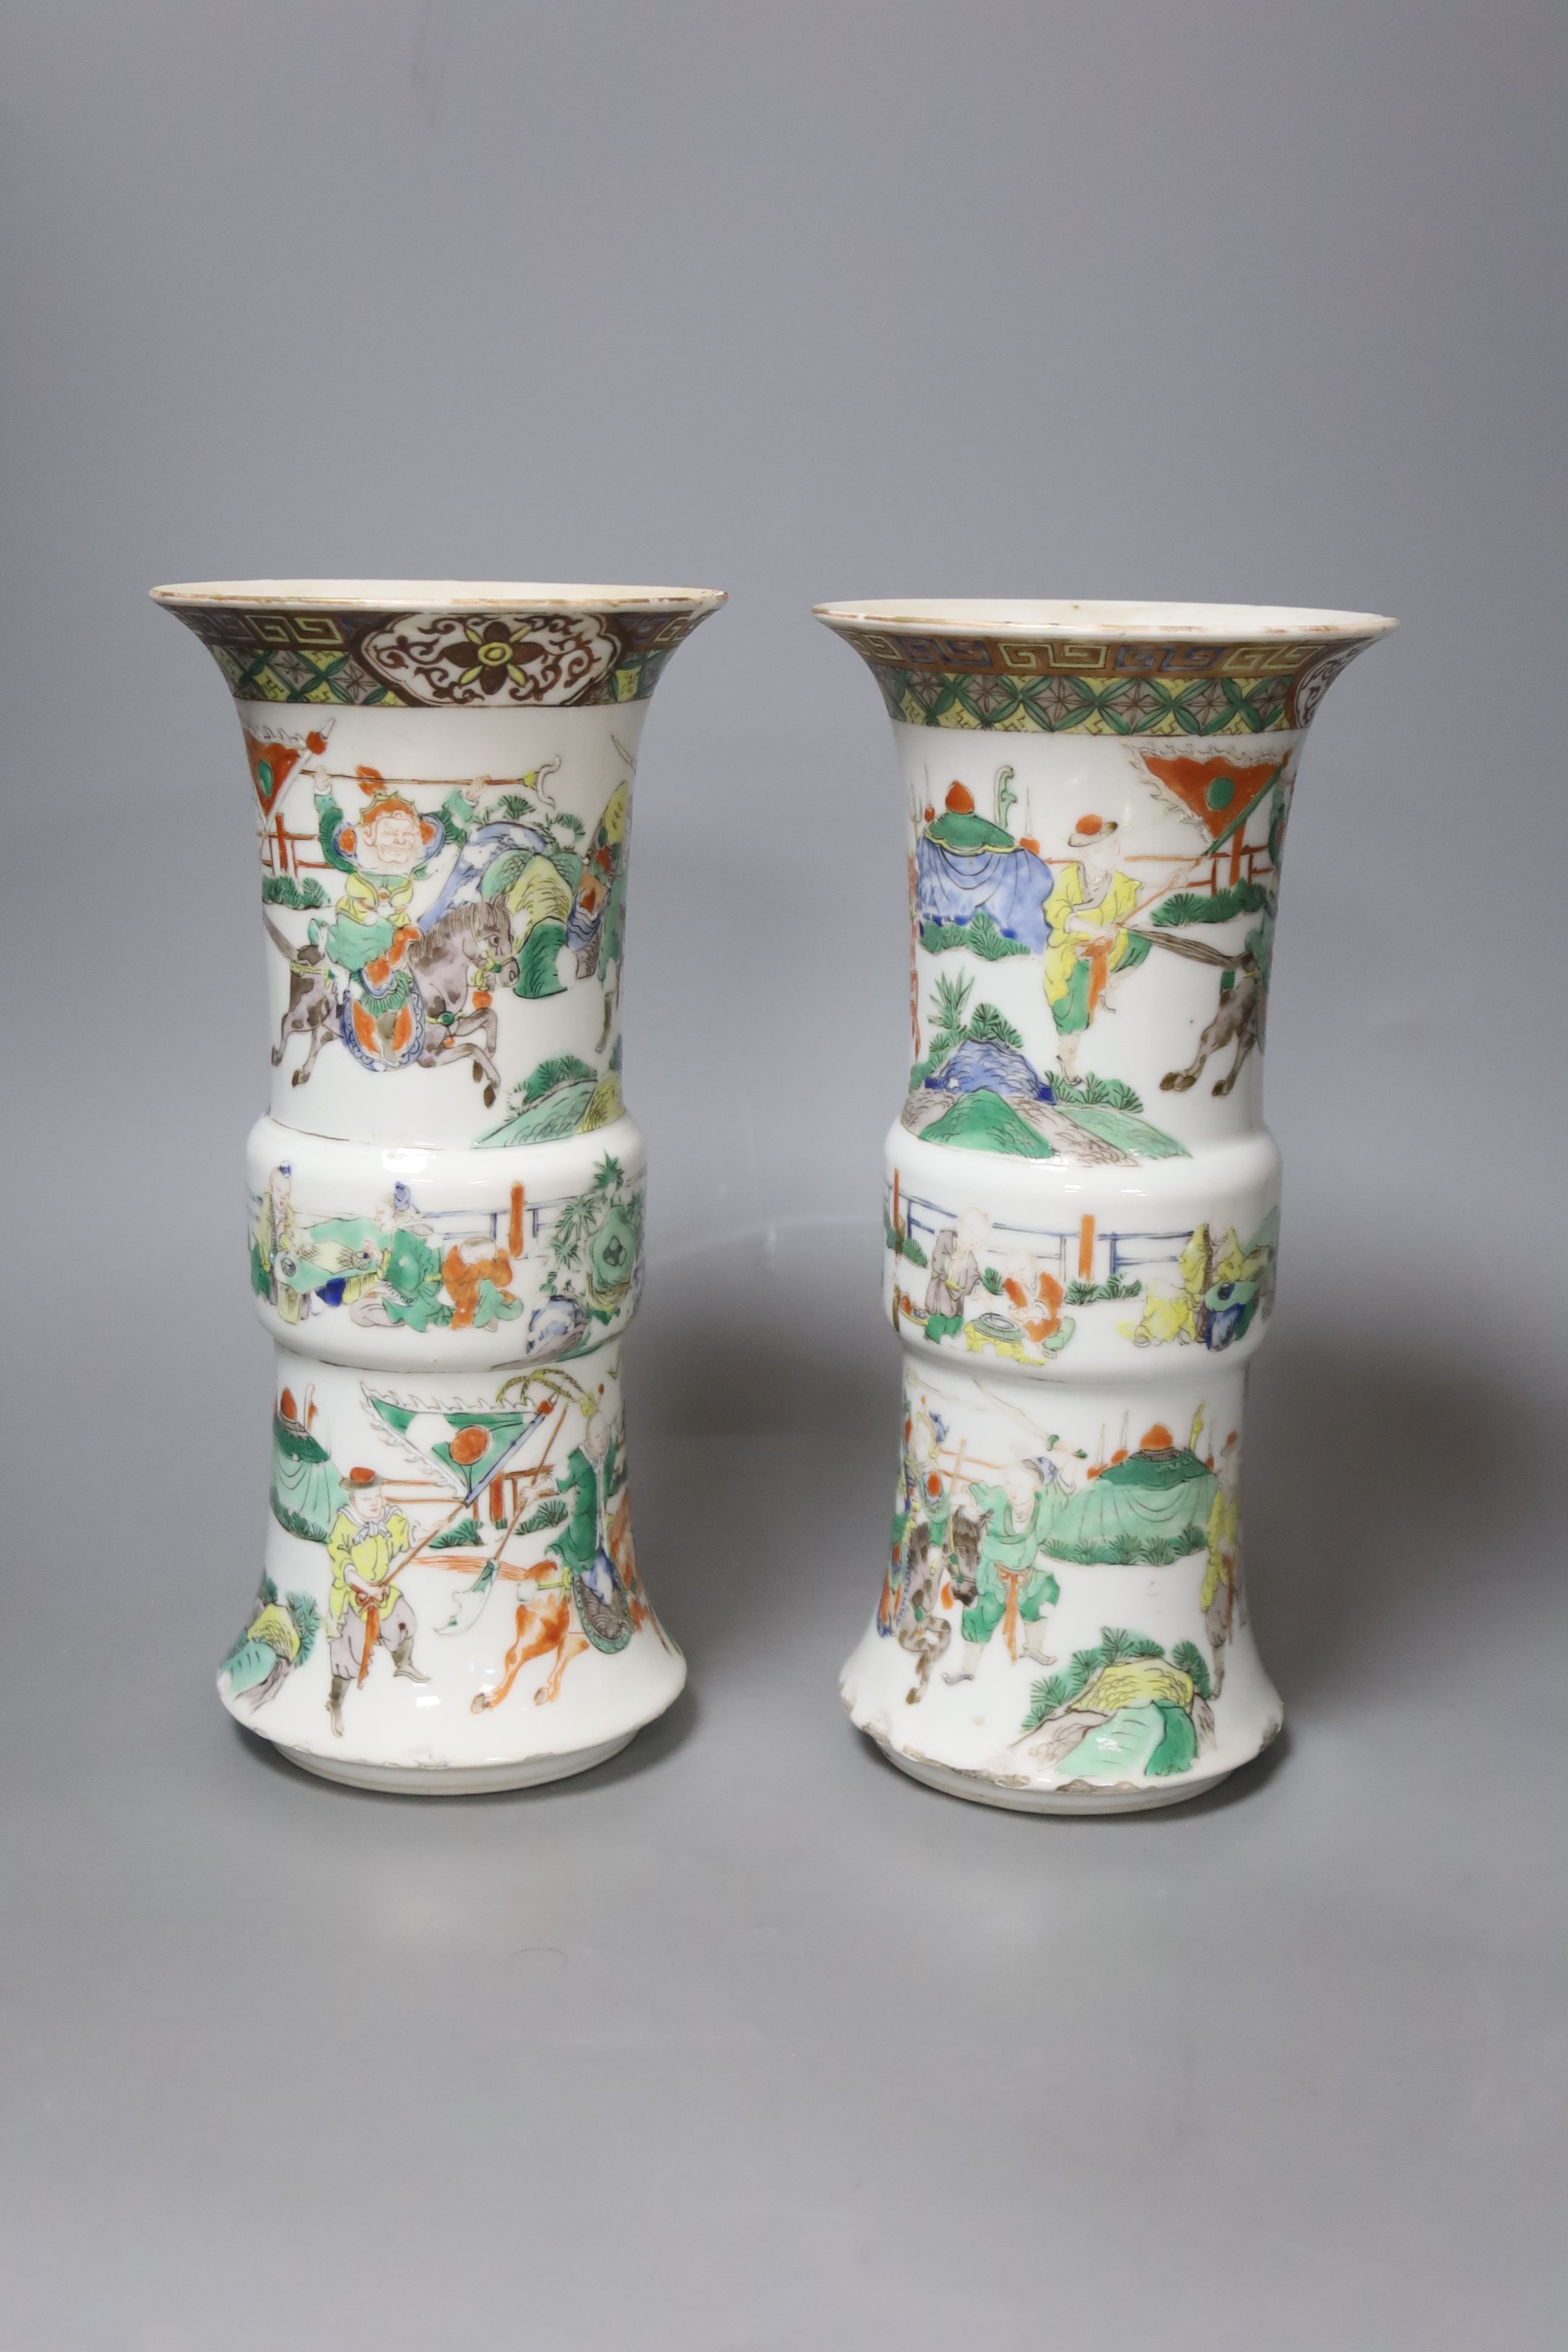 A pair of late 19th/early 20th century century Chinese famille verte beaker vases, height 25.5cm